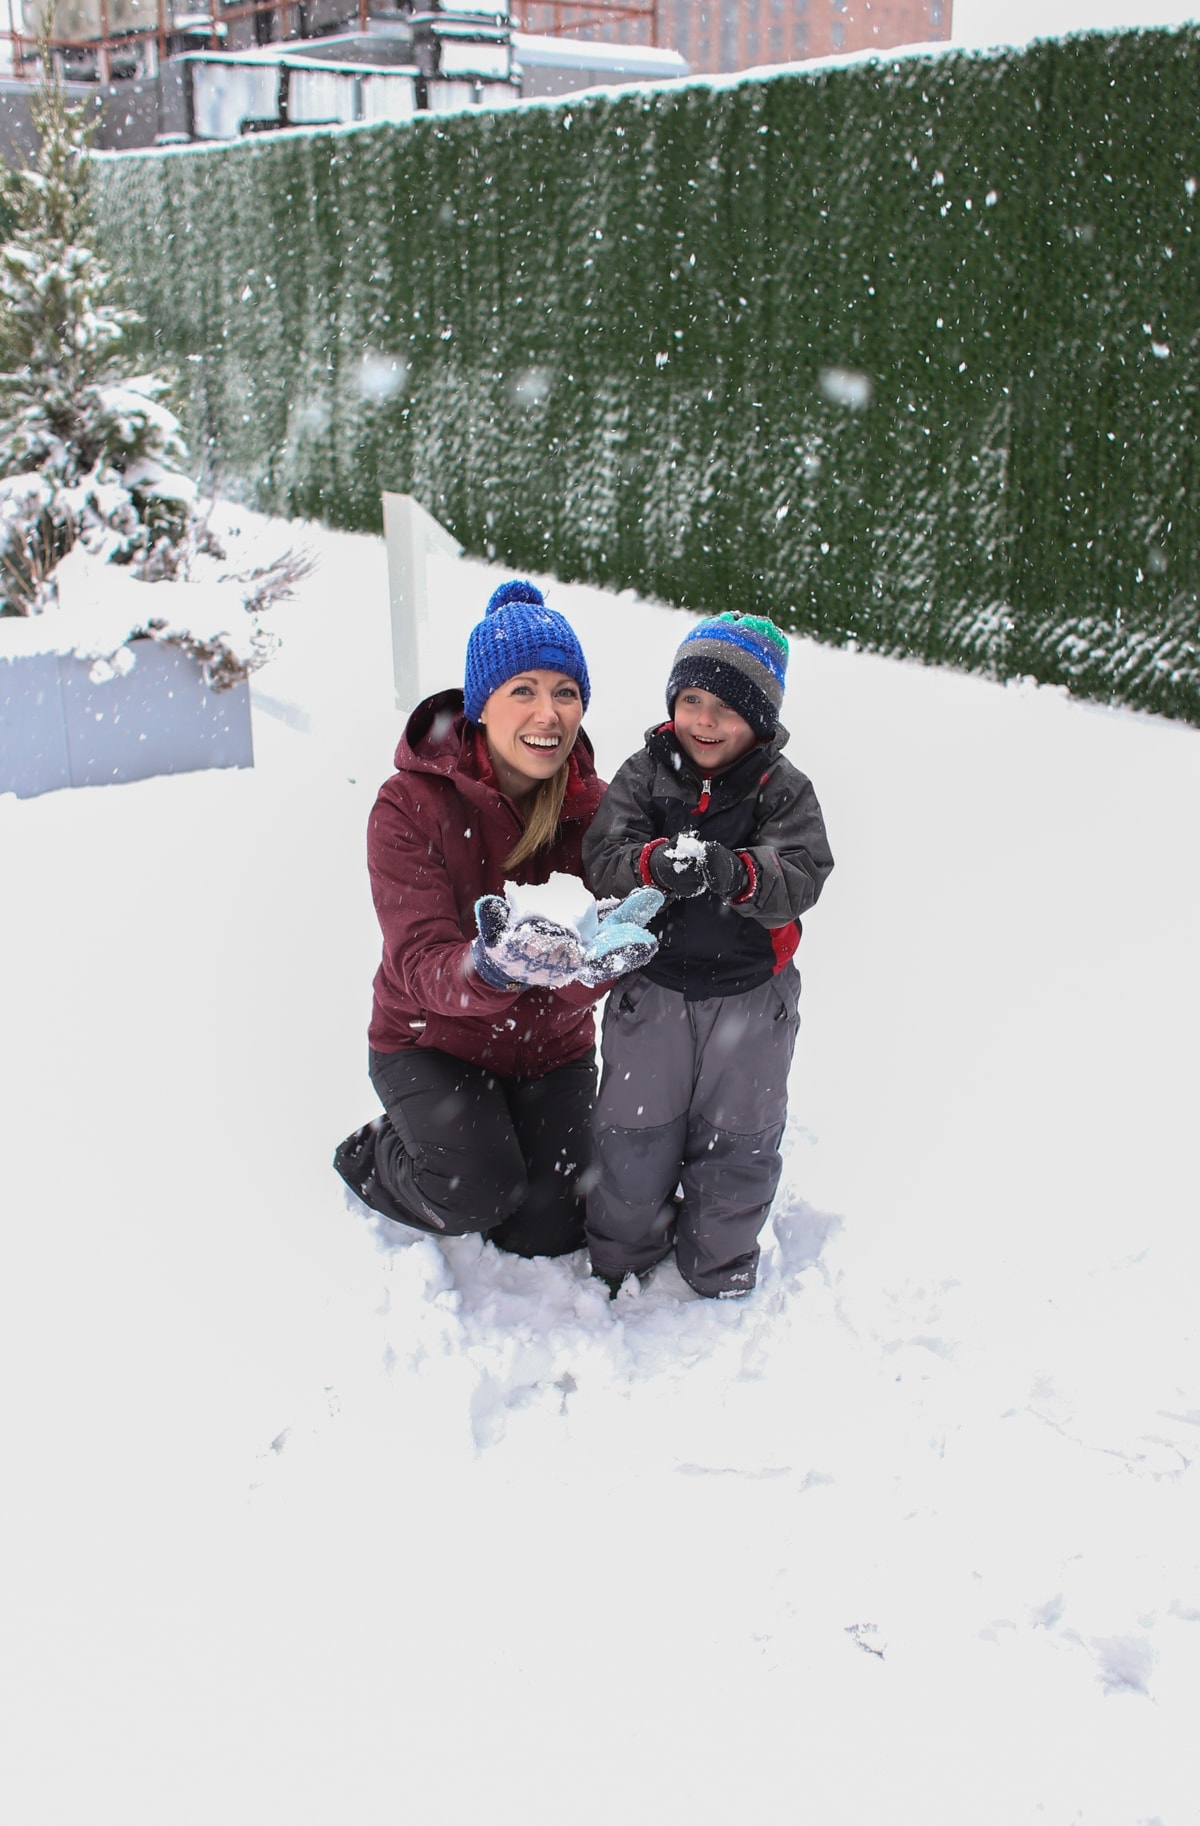 Lauren and Blake in the snow